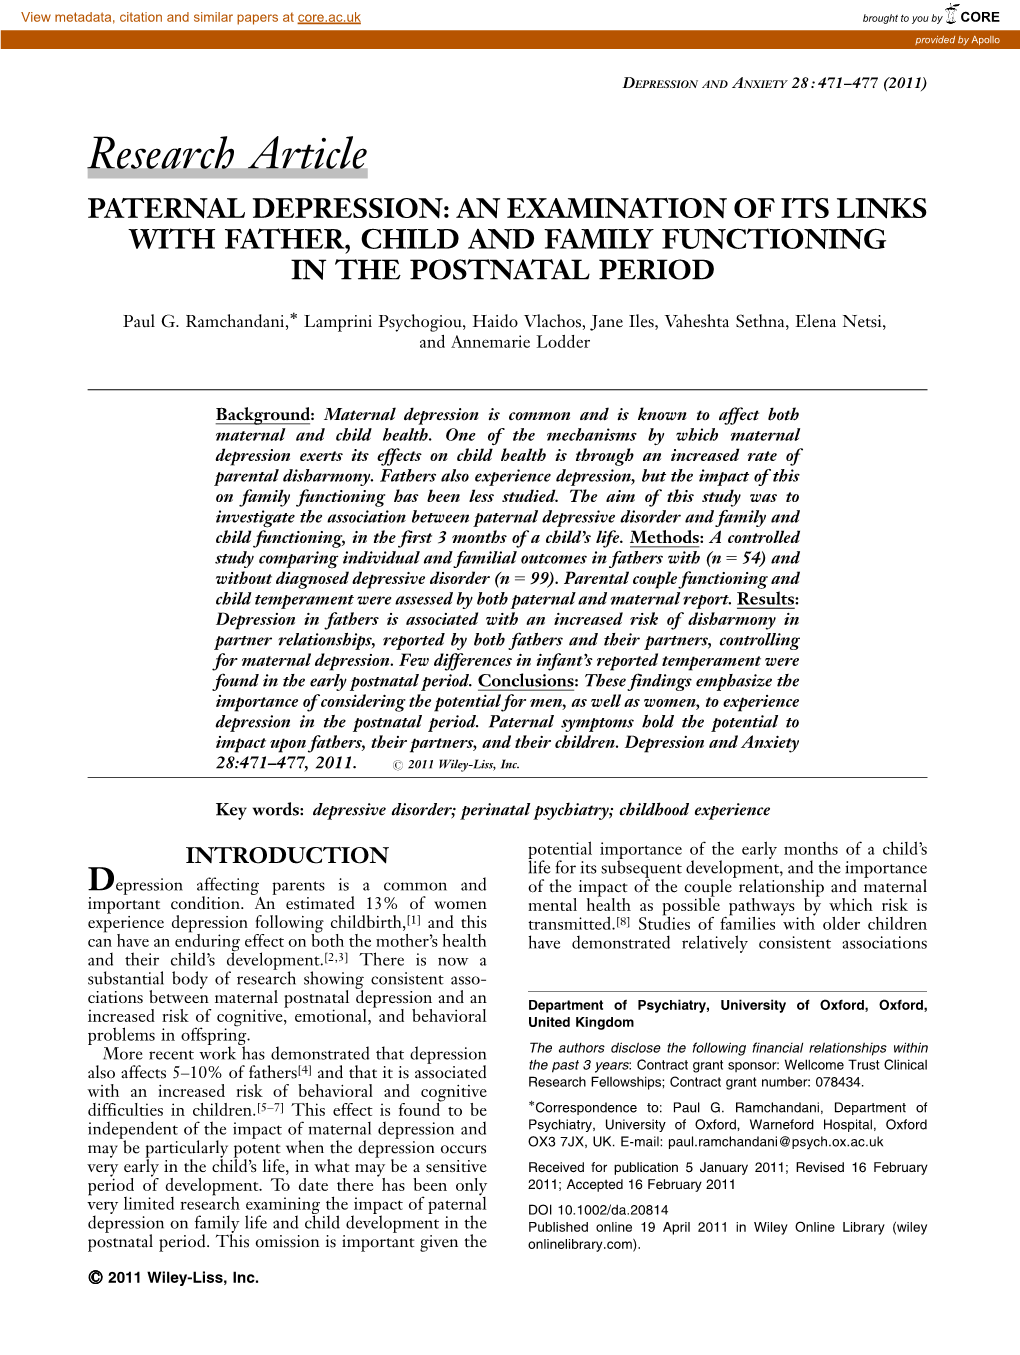 Paternal Depression: an Examination of Its Links with Father, Child and Family Functioning in the Postnatal Period